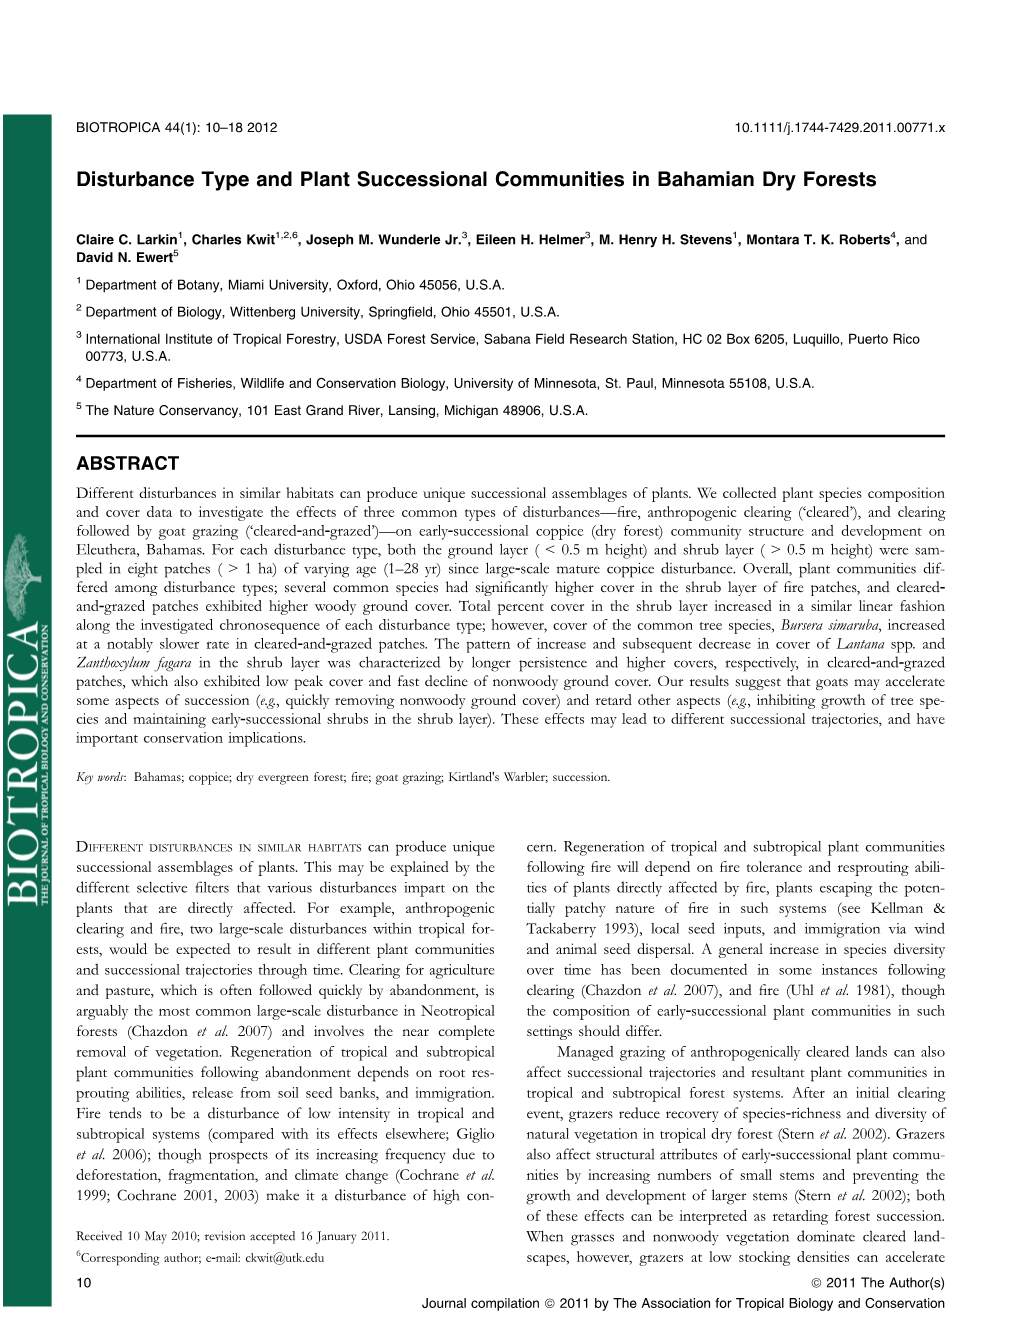 Disturbance Type and Plant Successional Communities in Bahamian Dry Forests